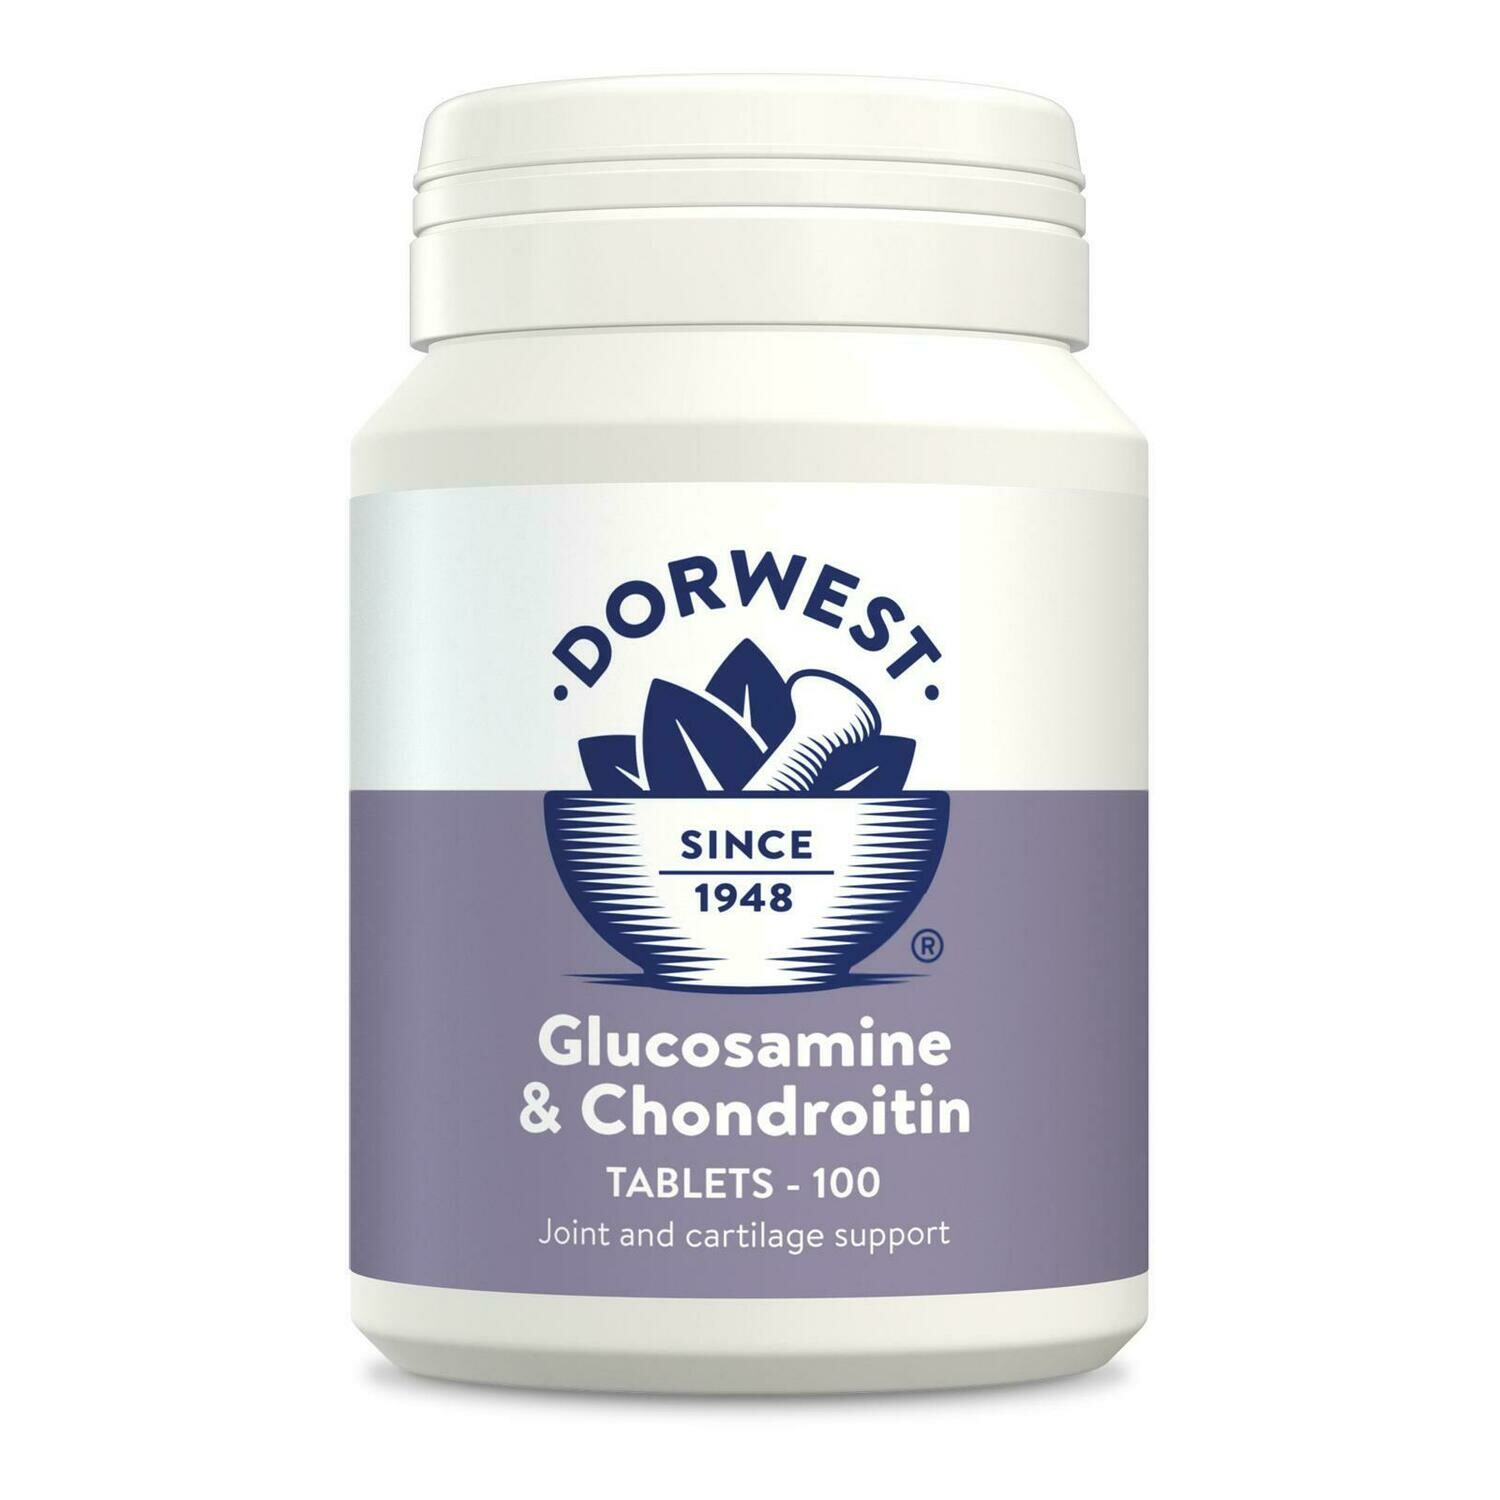 Dorwest Herbs Glucosamine & Chondroitin Tablets For Dogs And Cats (100)